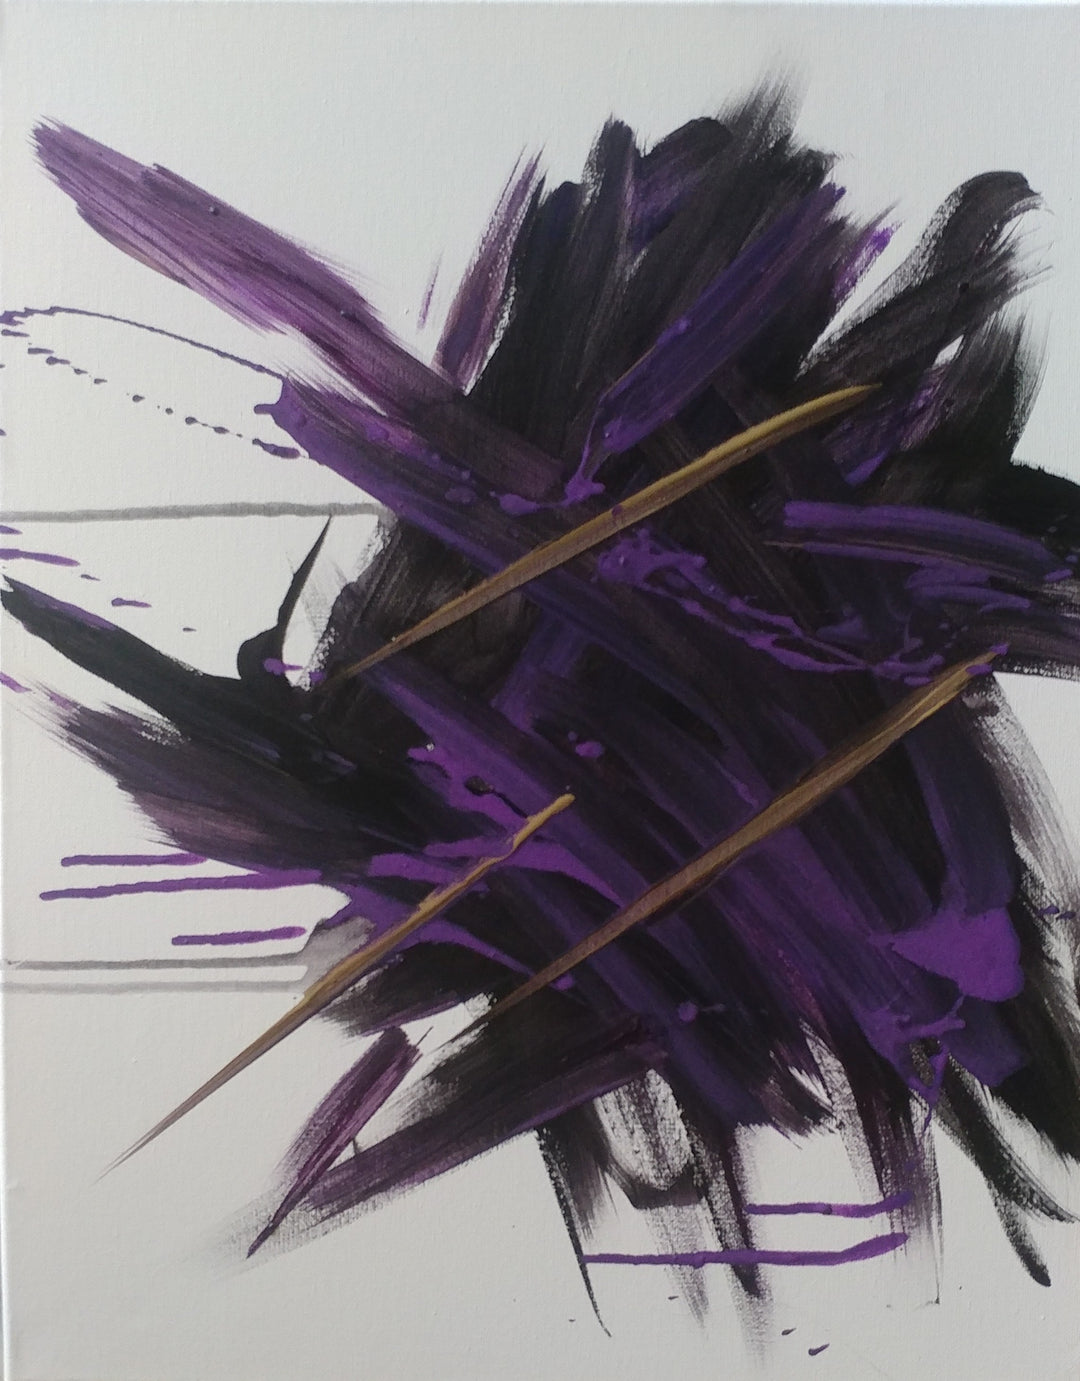 bold and chaotic strokes of black, purple and gold on white canvas.